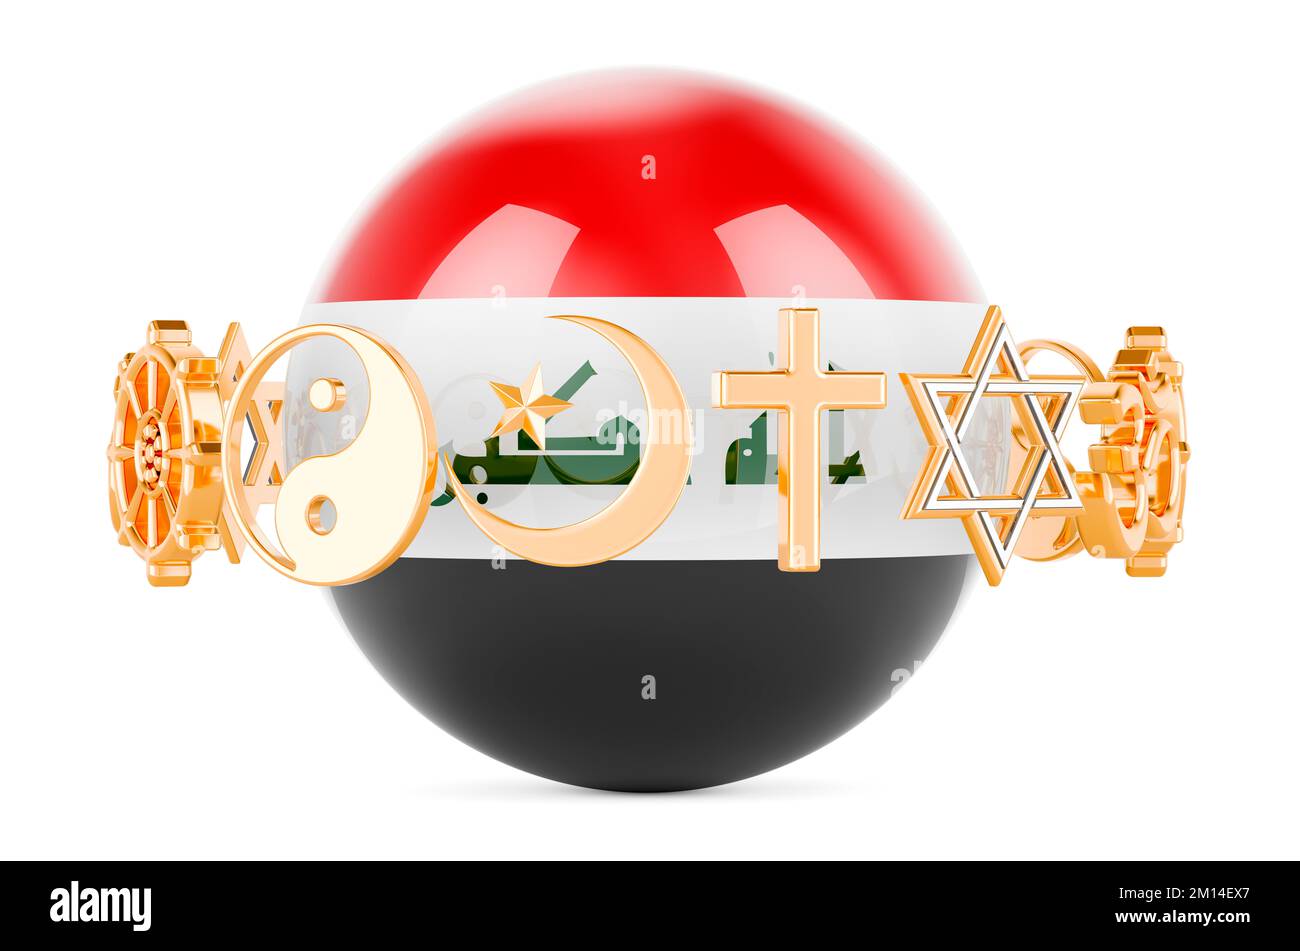 Iraqi flag painted on sphere with religions symbols around, 3D rendering isolated on white background Stock Photo